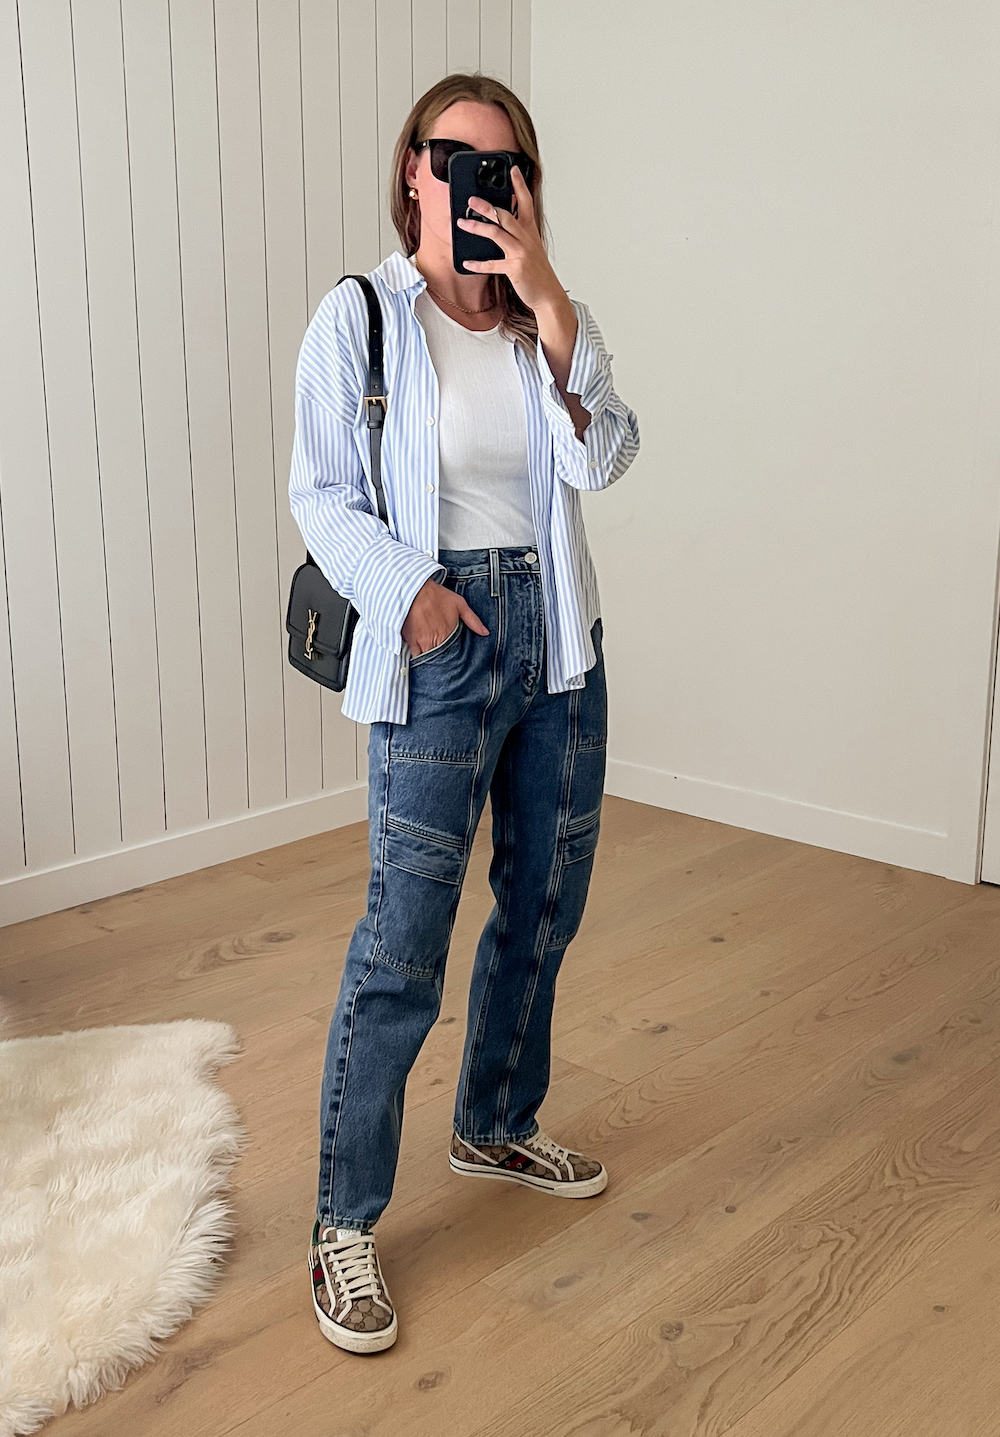 Woman wearing utility jeans, sneakers, a white t-shirt and an oversized button down.